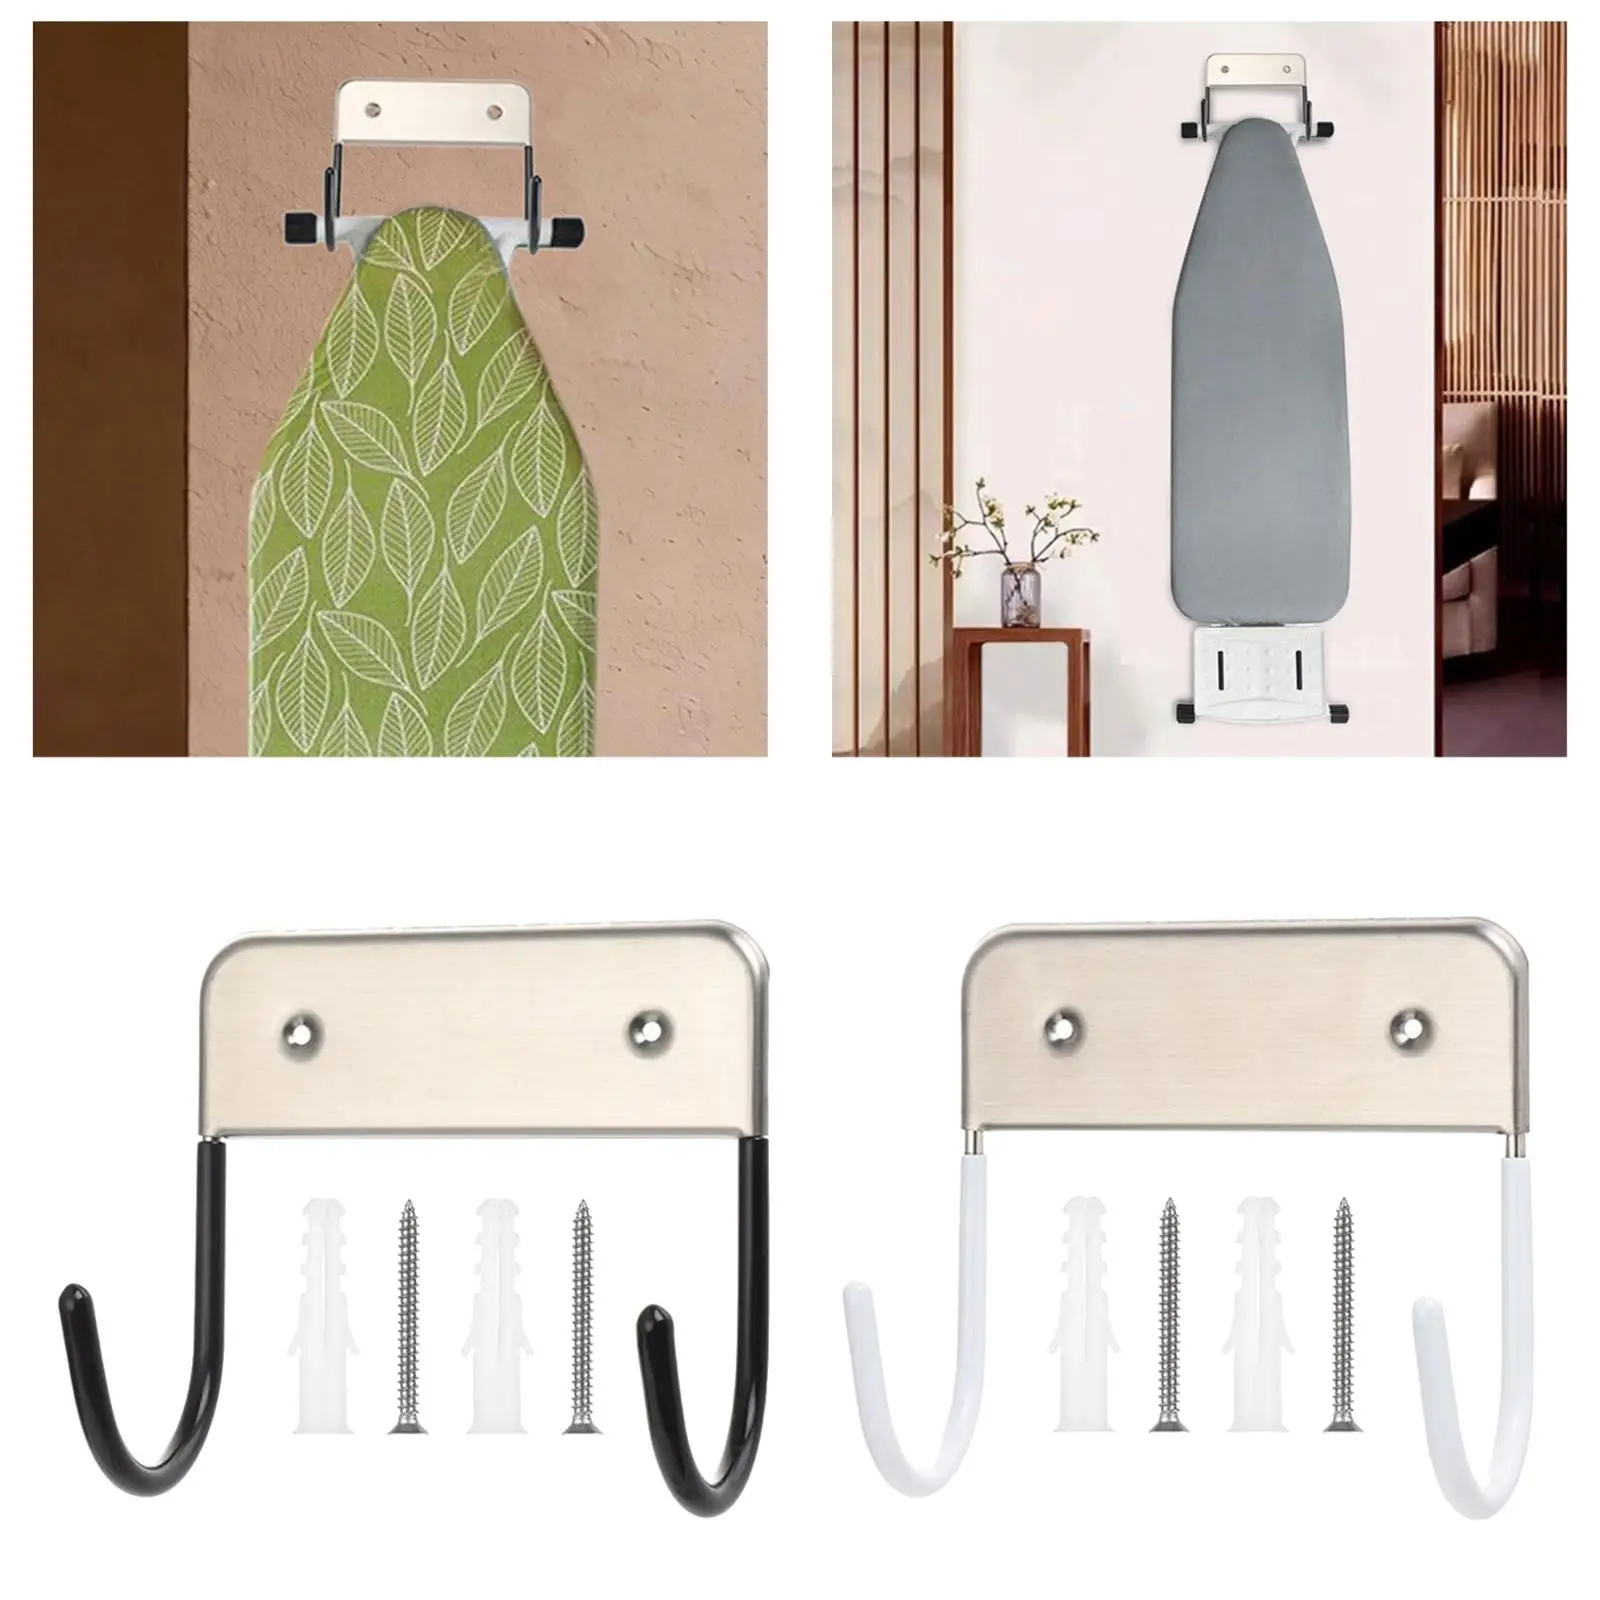 Household Ironing Board Holder Wall Hanging Bracket Stable Removable Hanger Home